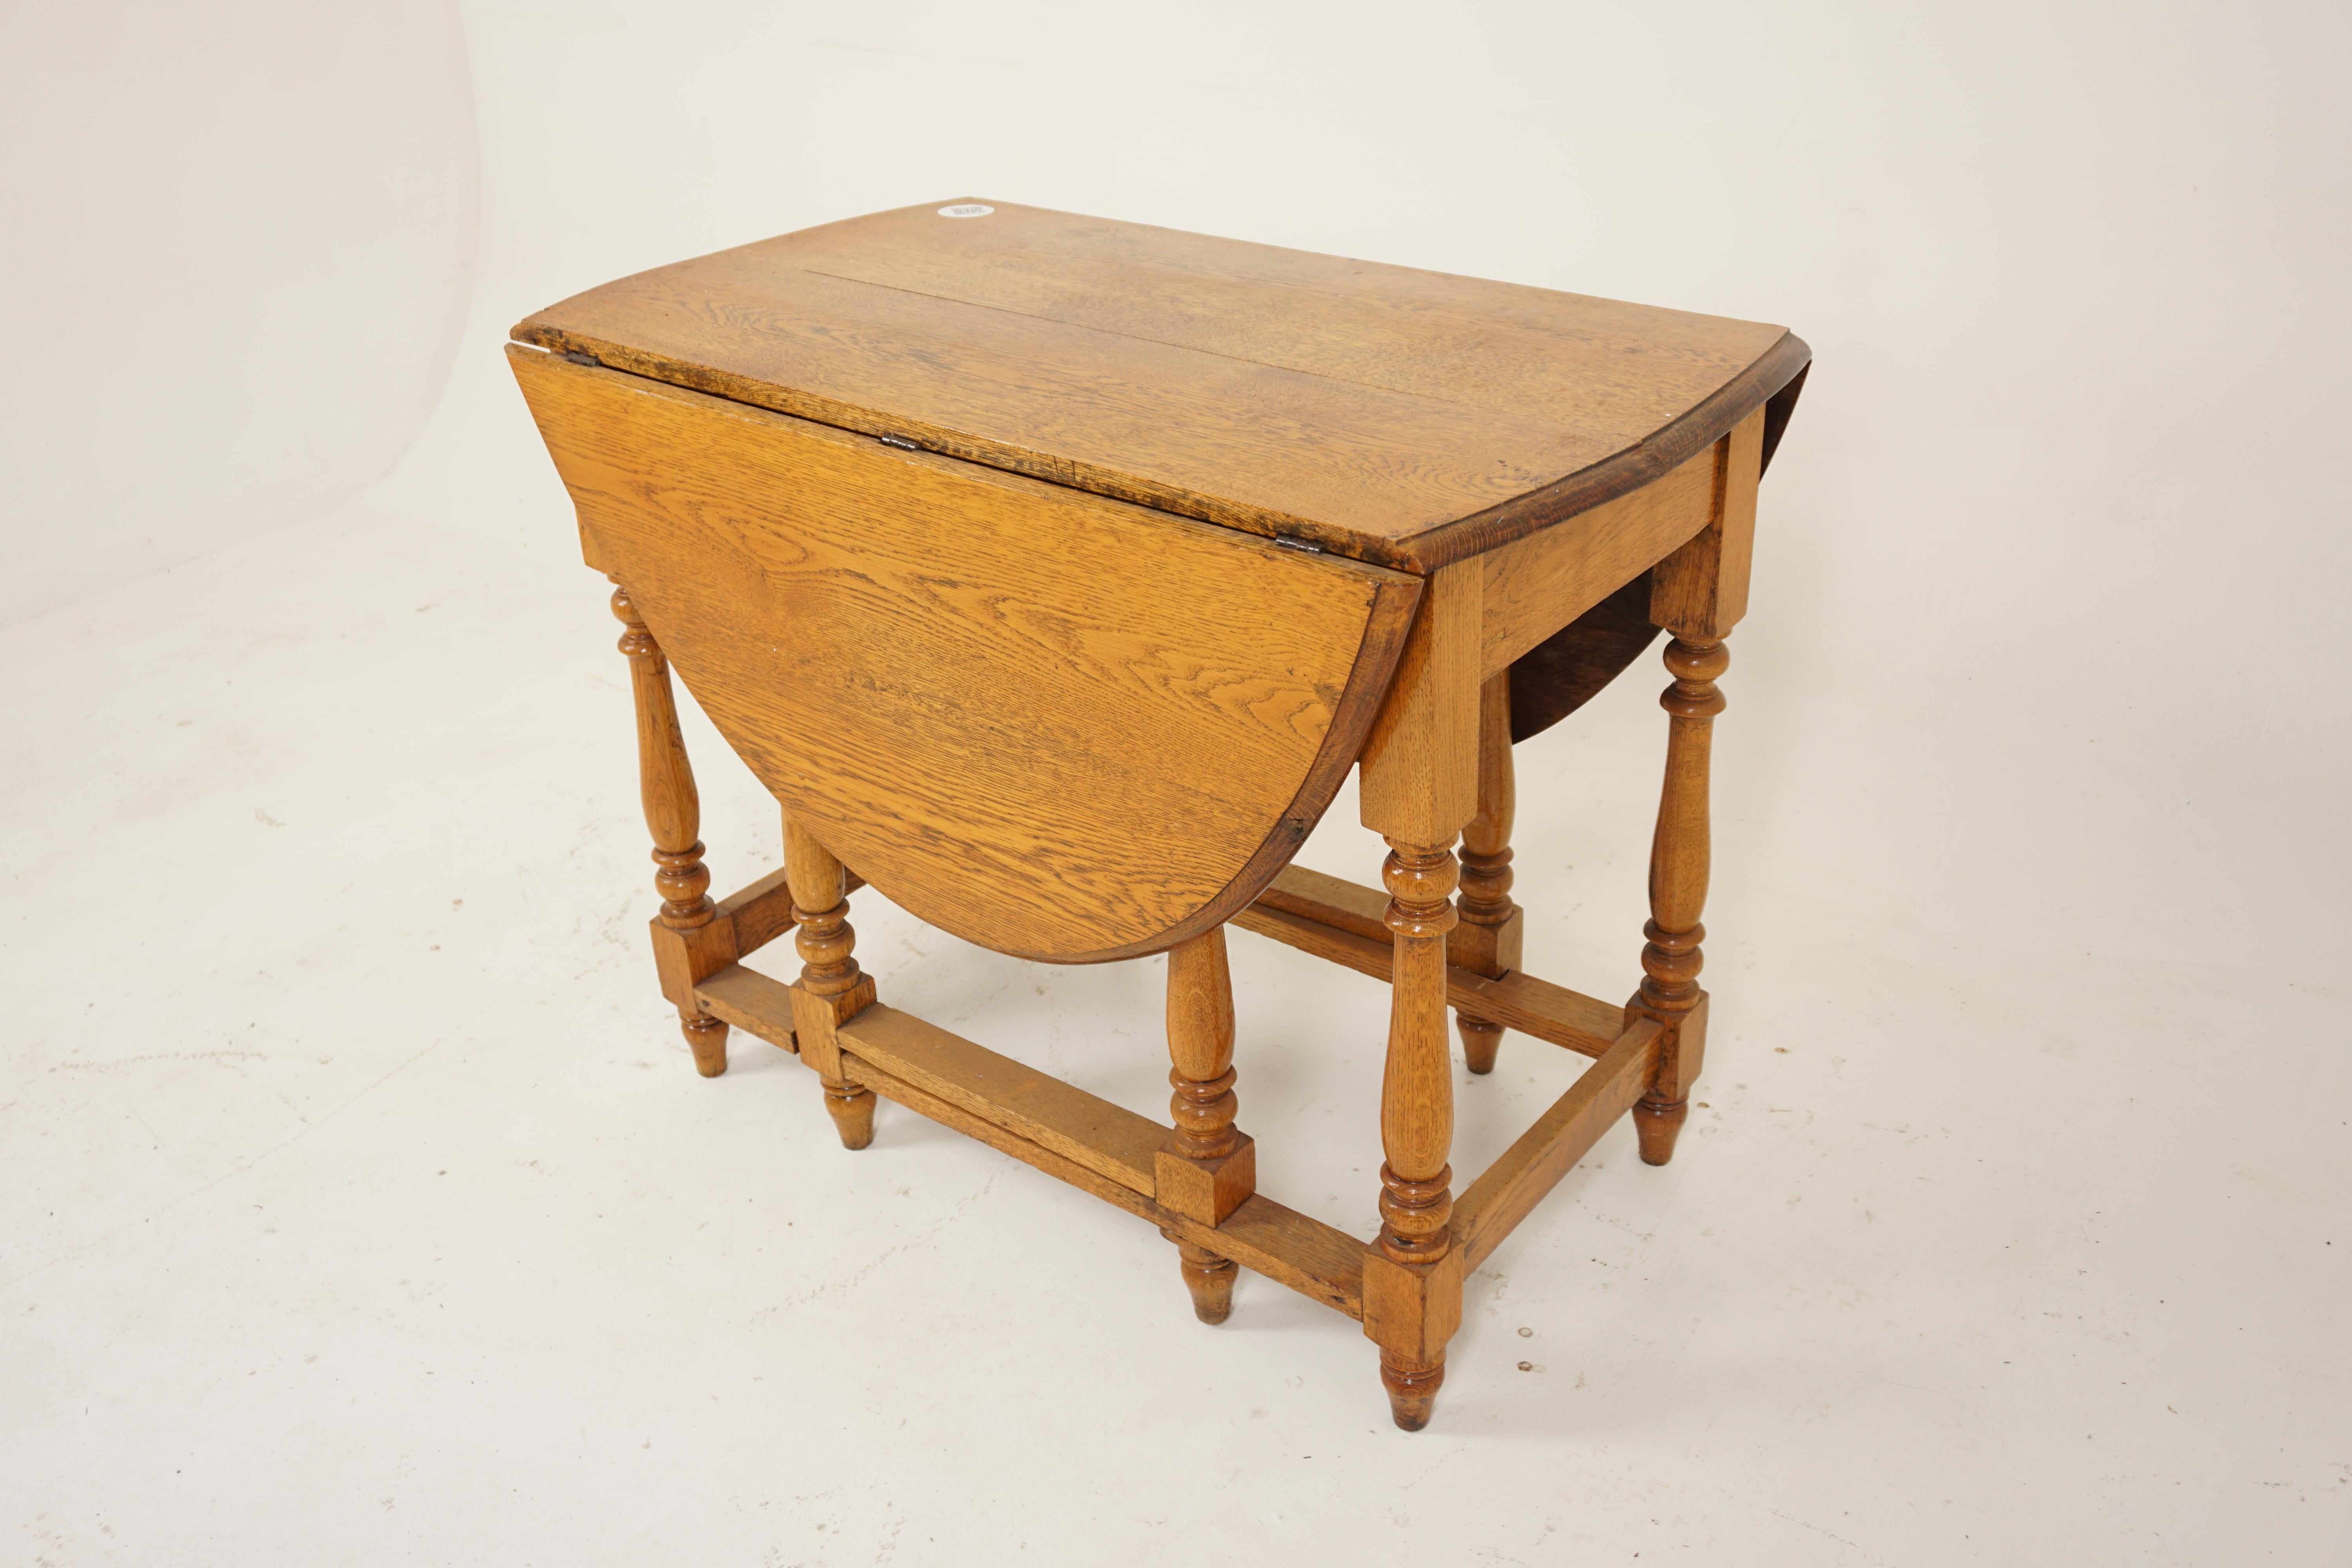 Ant. golden oak gateleg table, drop leaf table, kitchen table, Scotland 1910, H809

Scotland 1910
Sloid Oak
Original Finish
Solid tabletop
Pair of oval leaves to the sides
All supported by thick turned legs
Connected by stretchers
Very